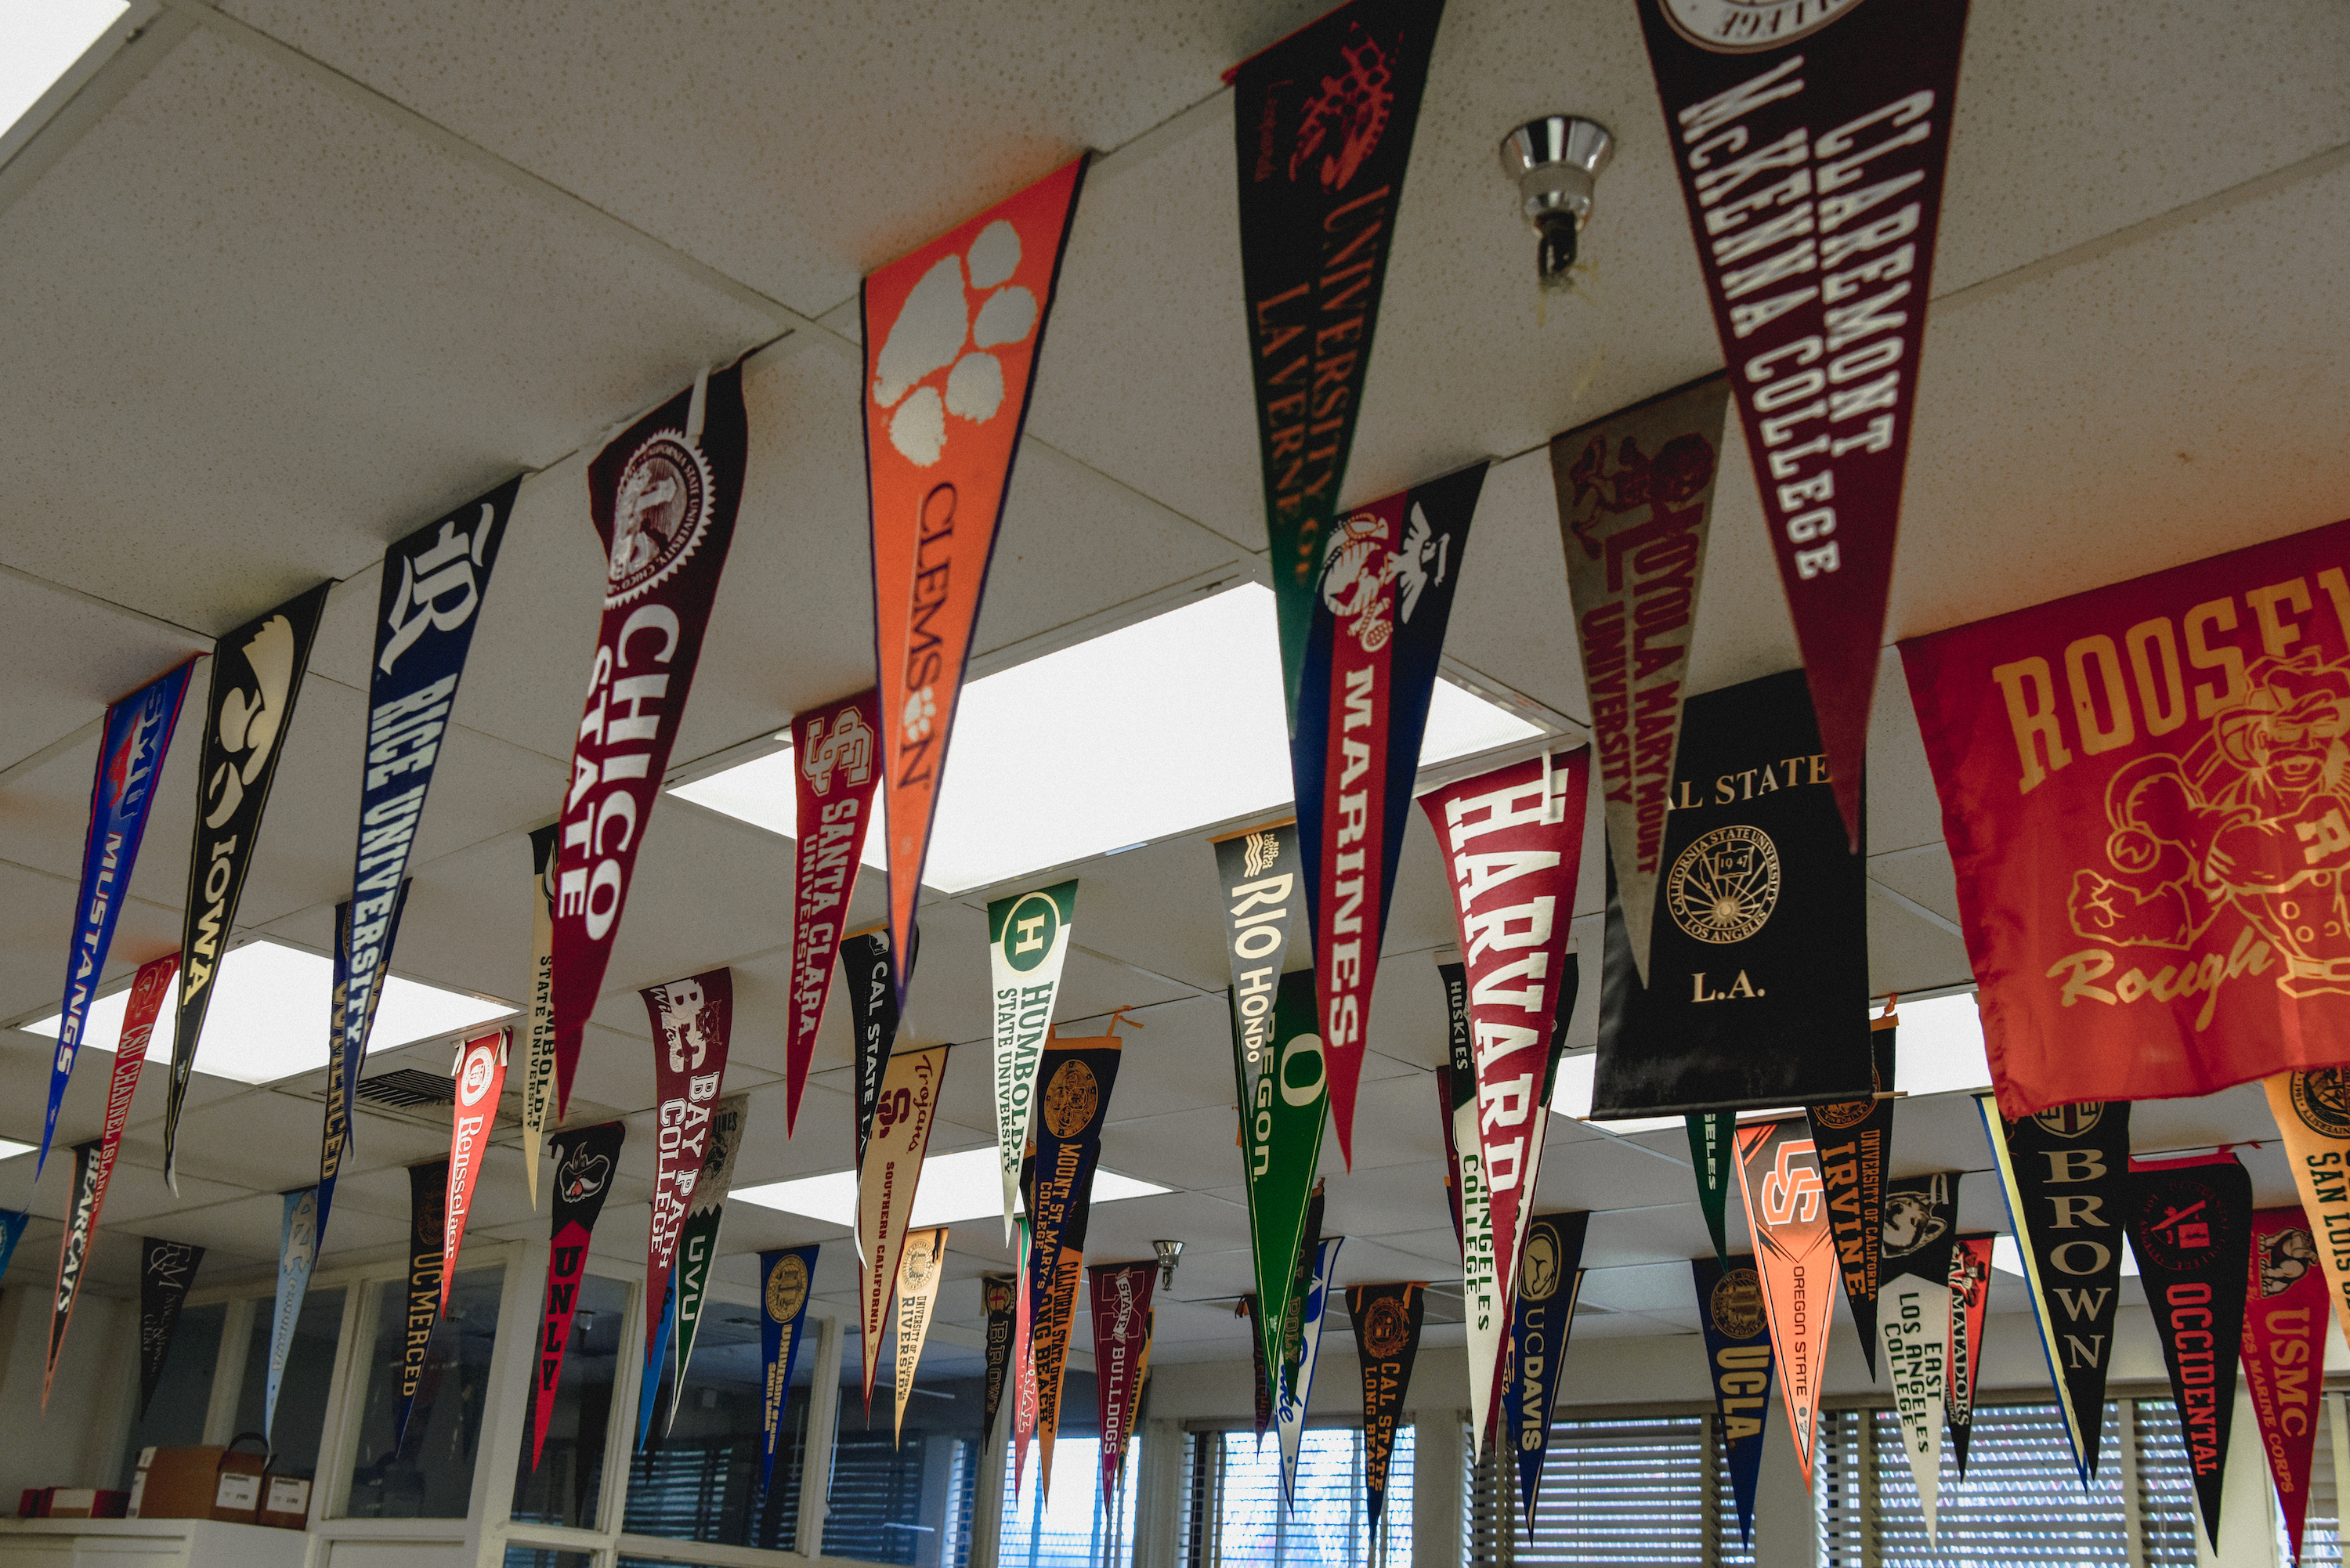 College penents hang from the ceiling,